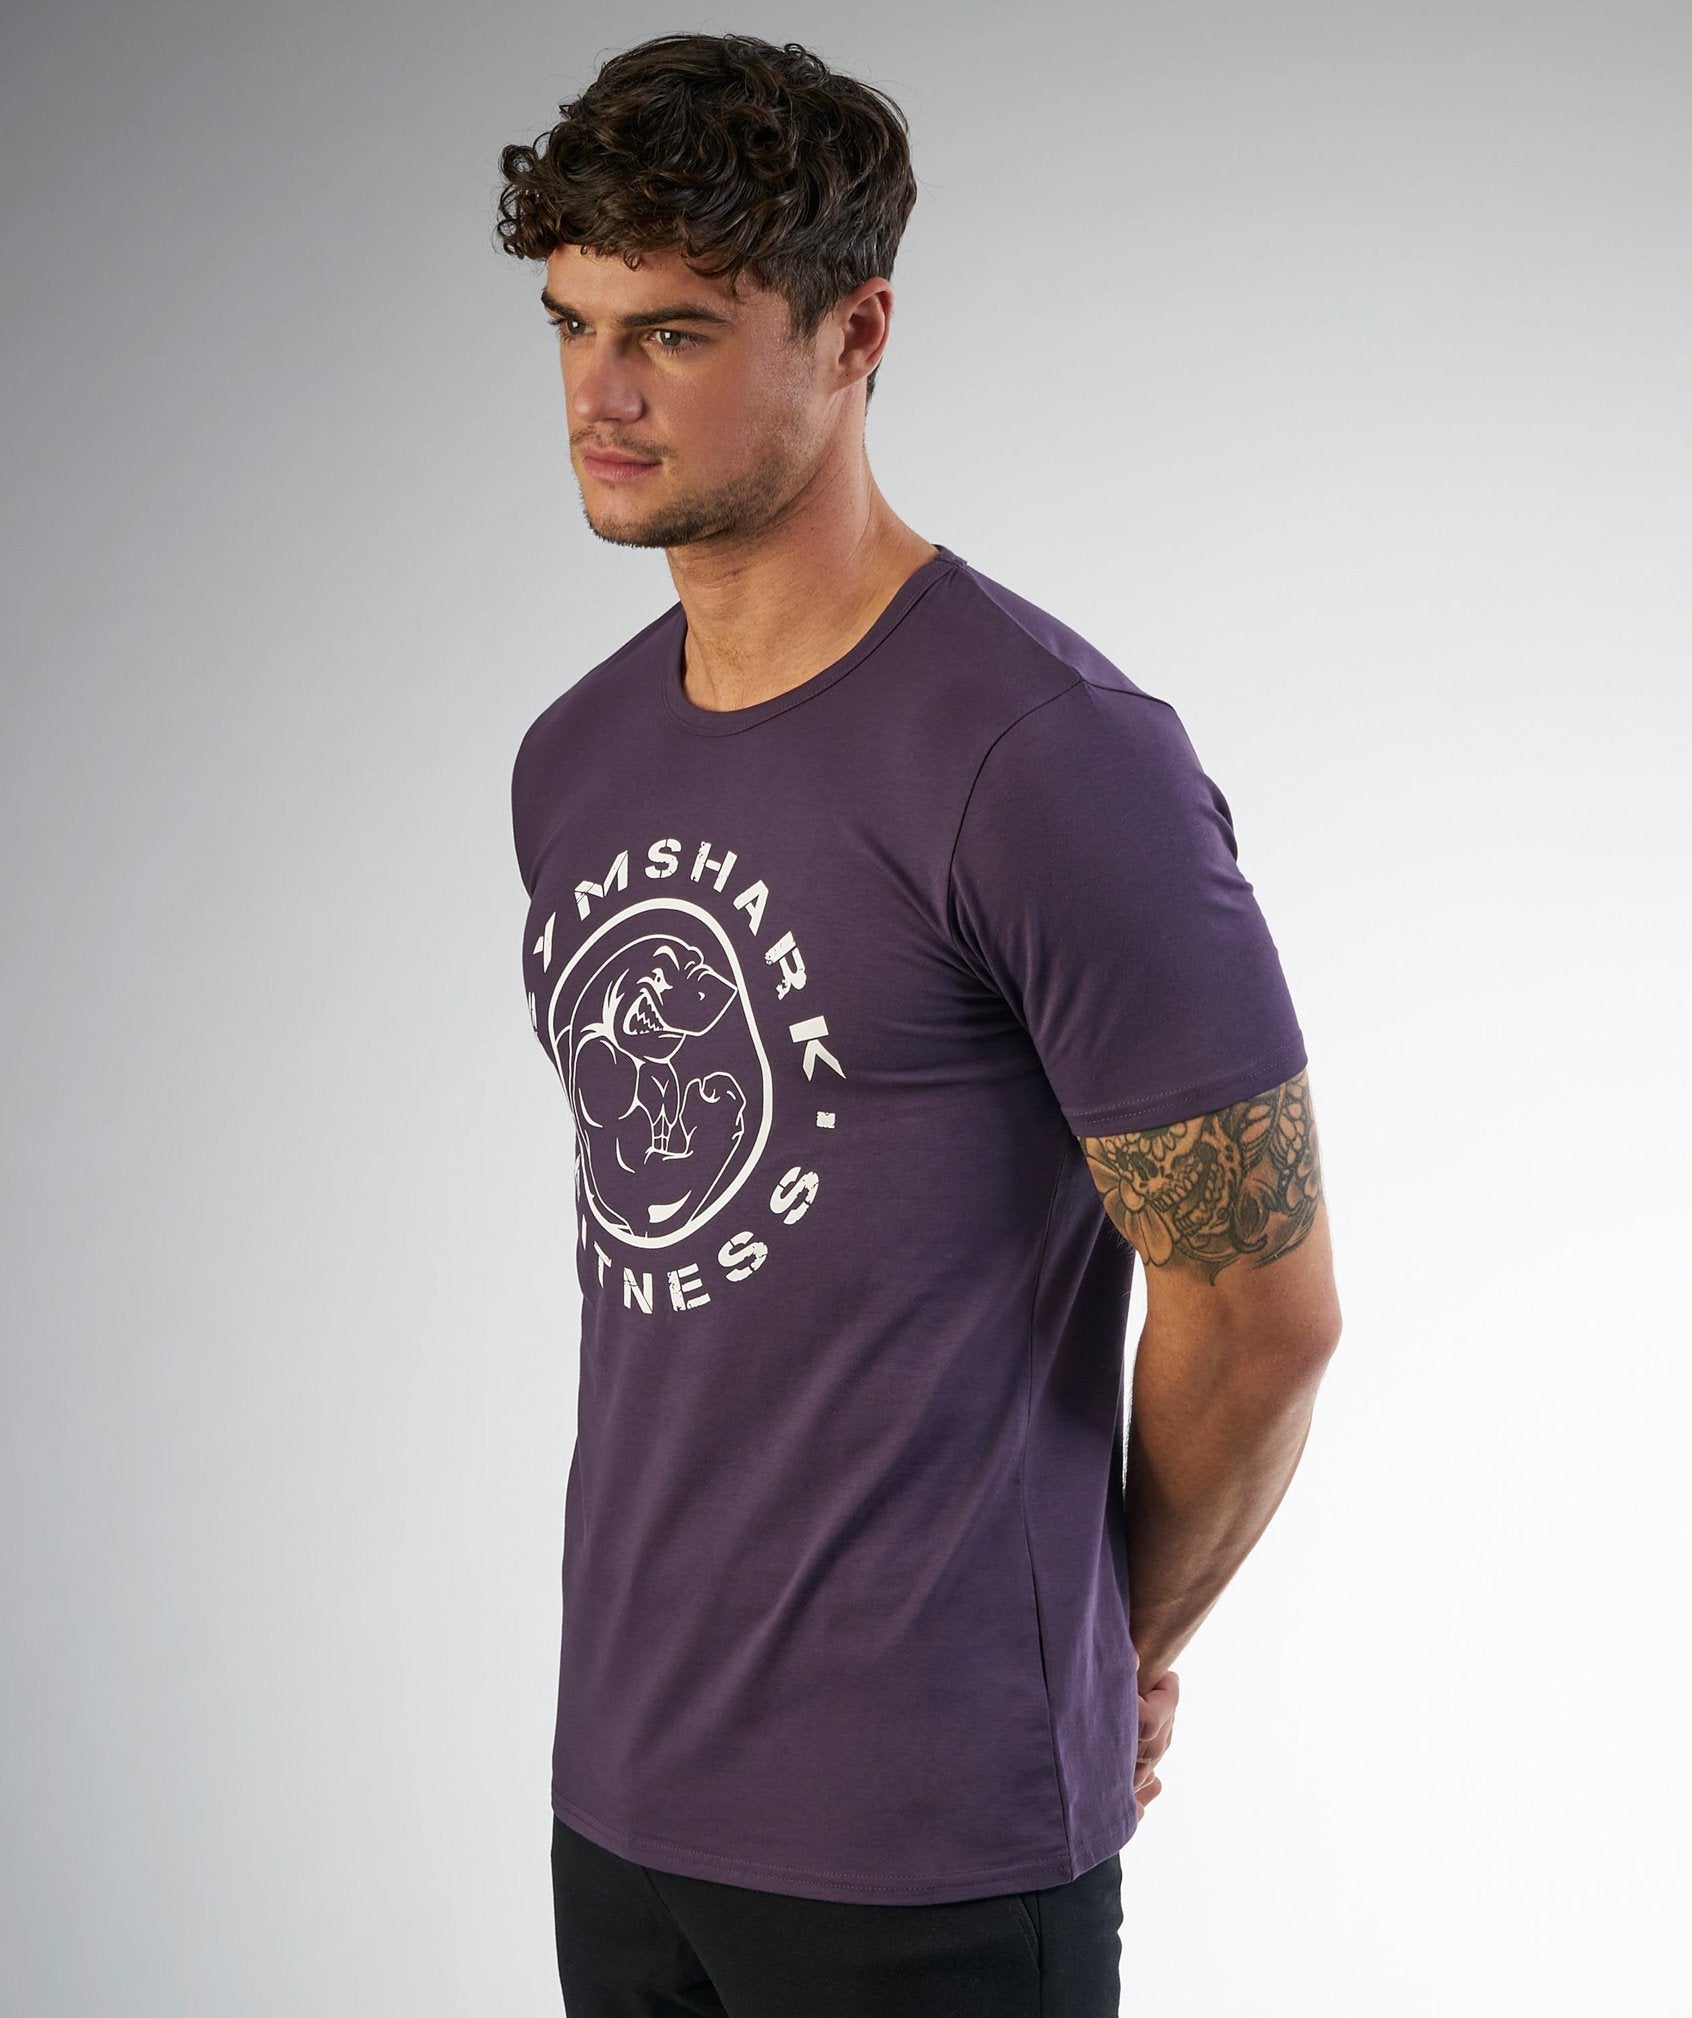 Fitness T-Shirt in Nightshade Purple - view 3